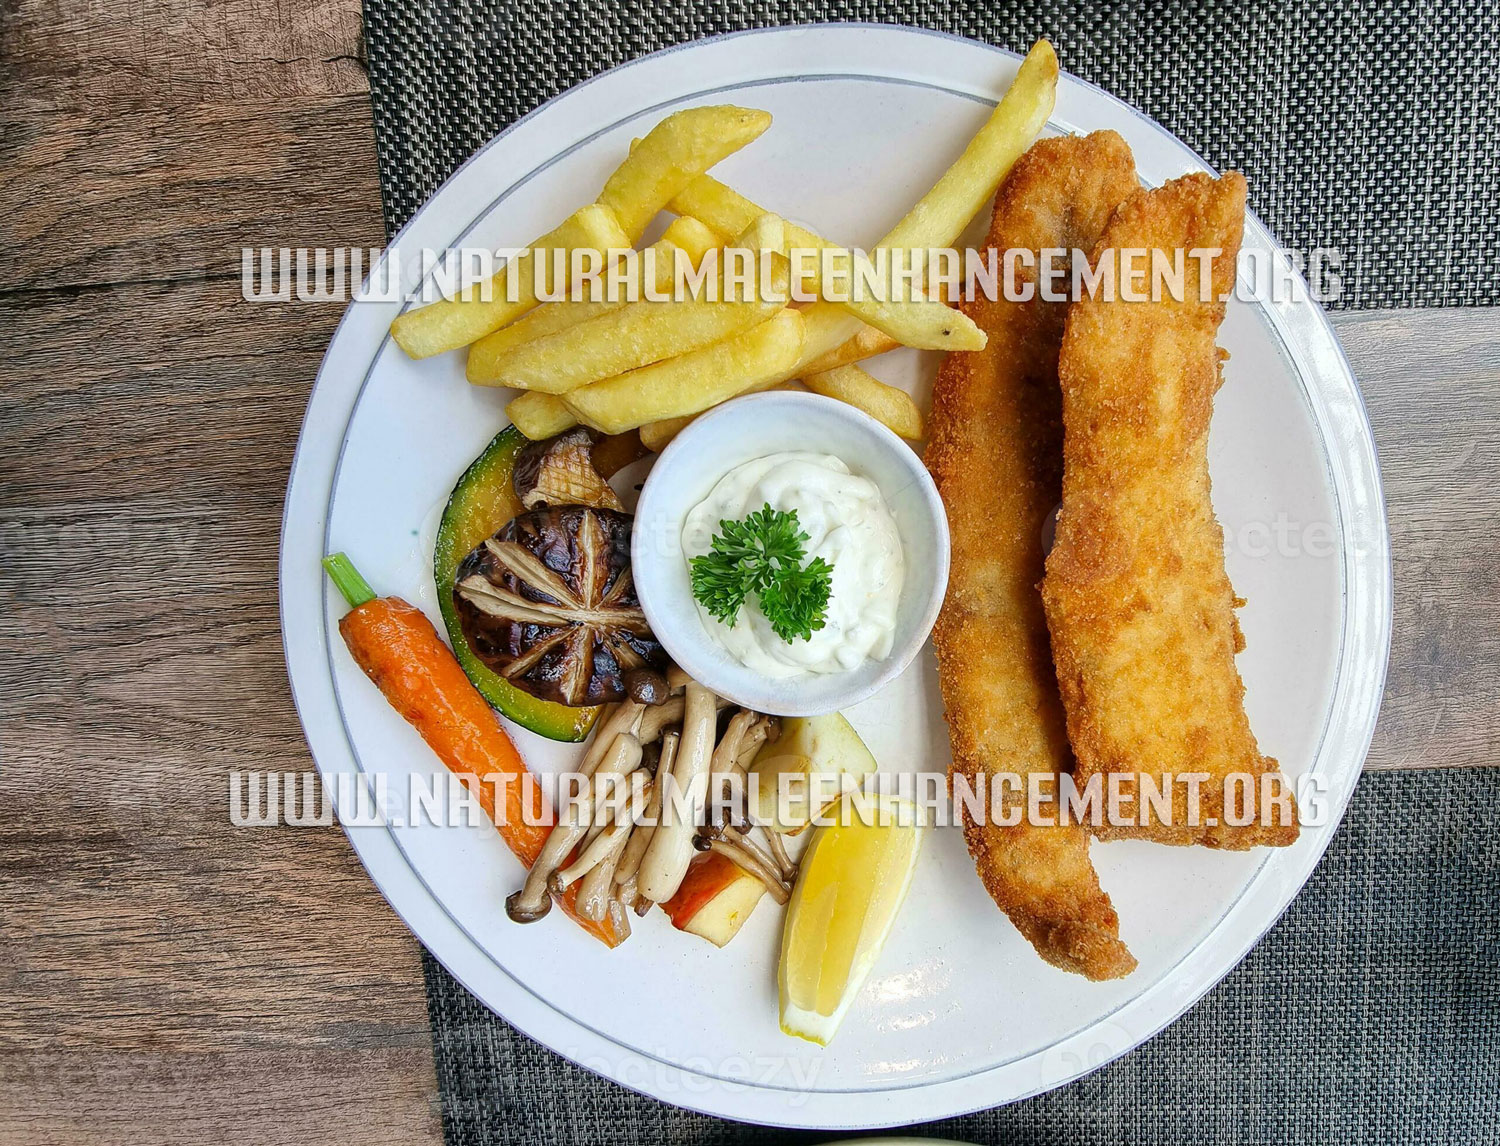 Resep Fish and Chips